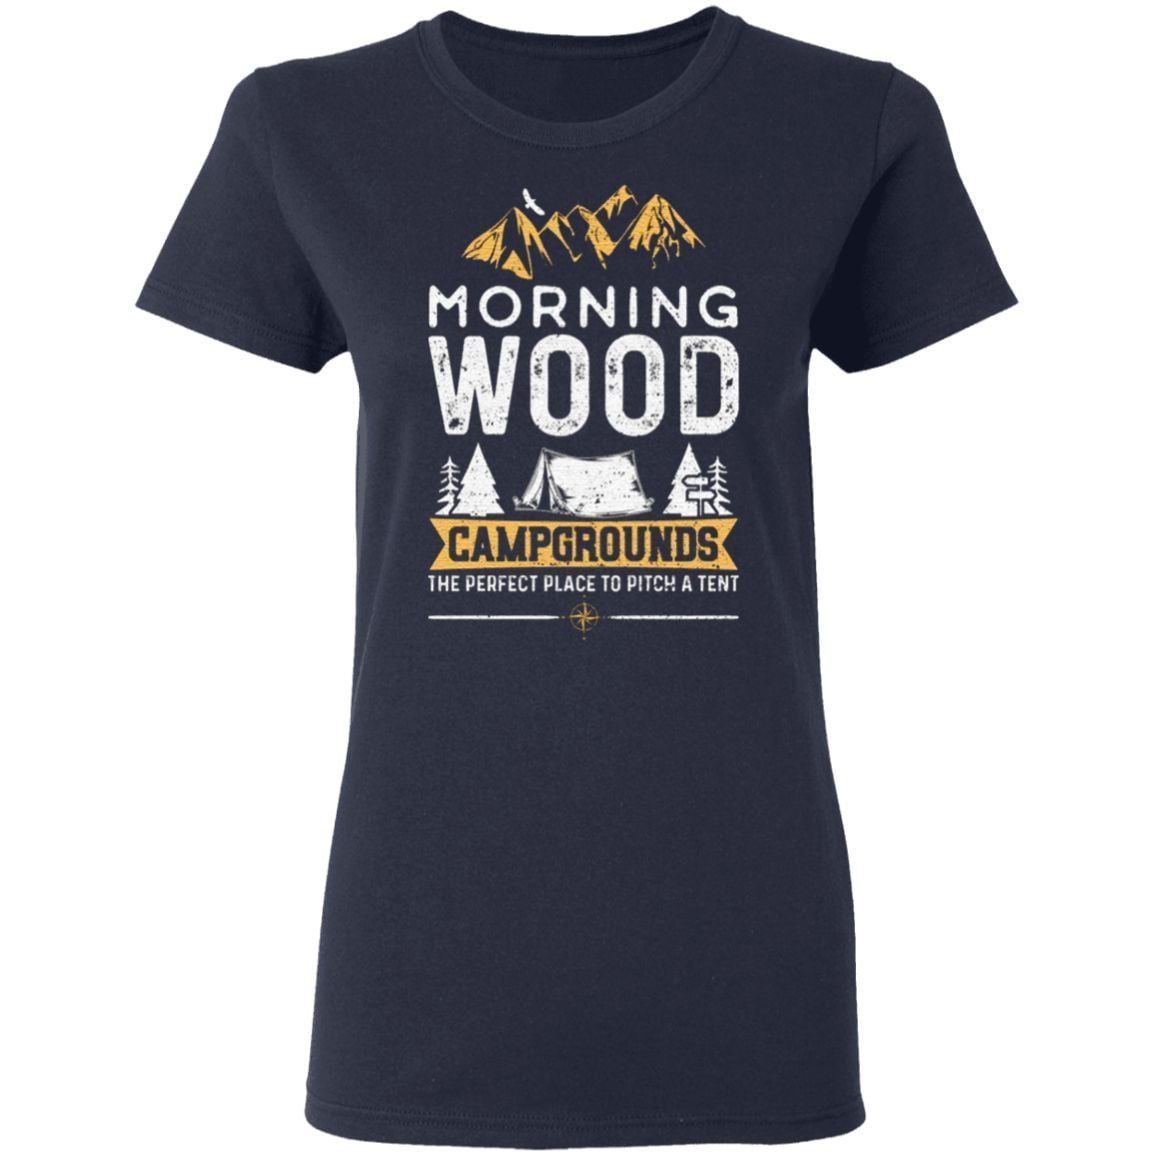 Morning Wood Campgrounds The Perfect Place To Pitch A Tent T-Shirt